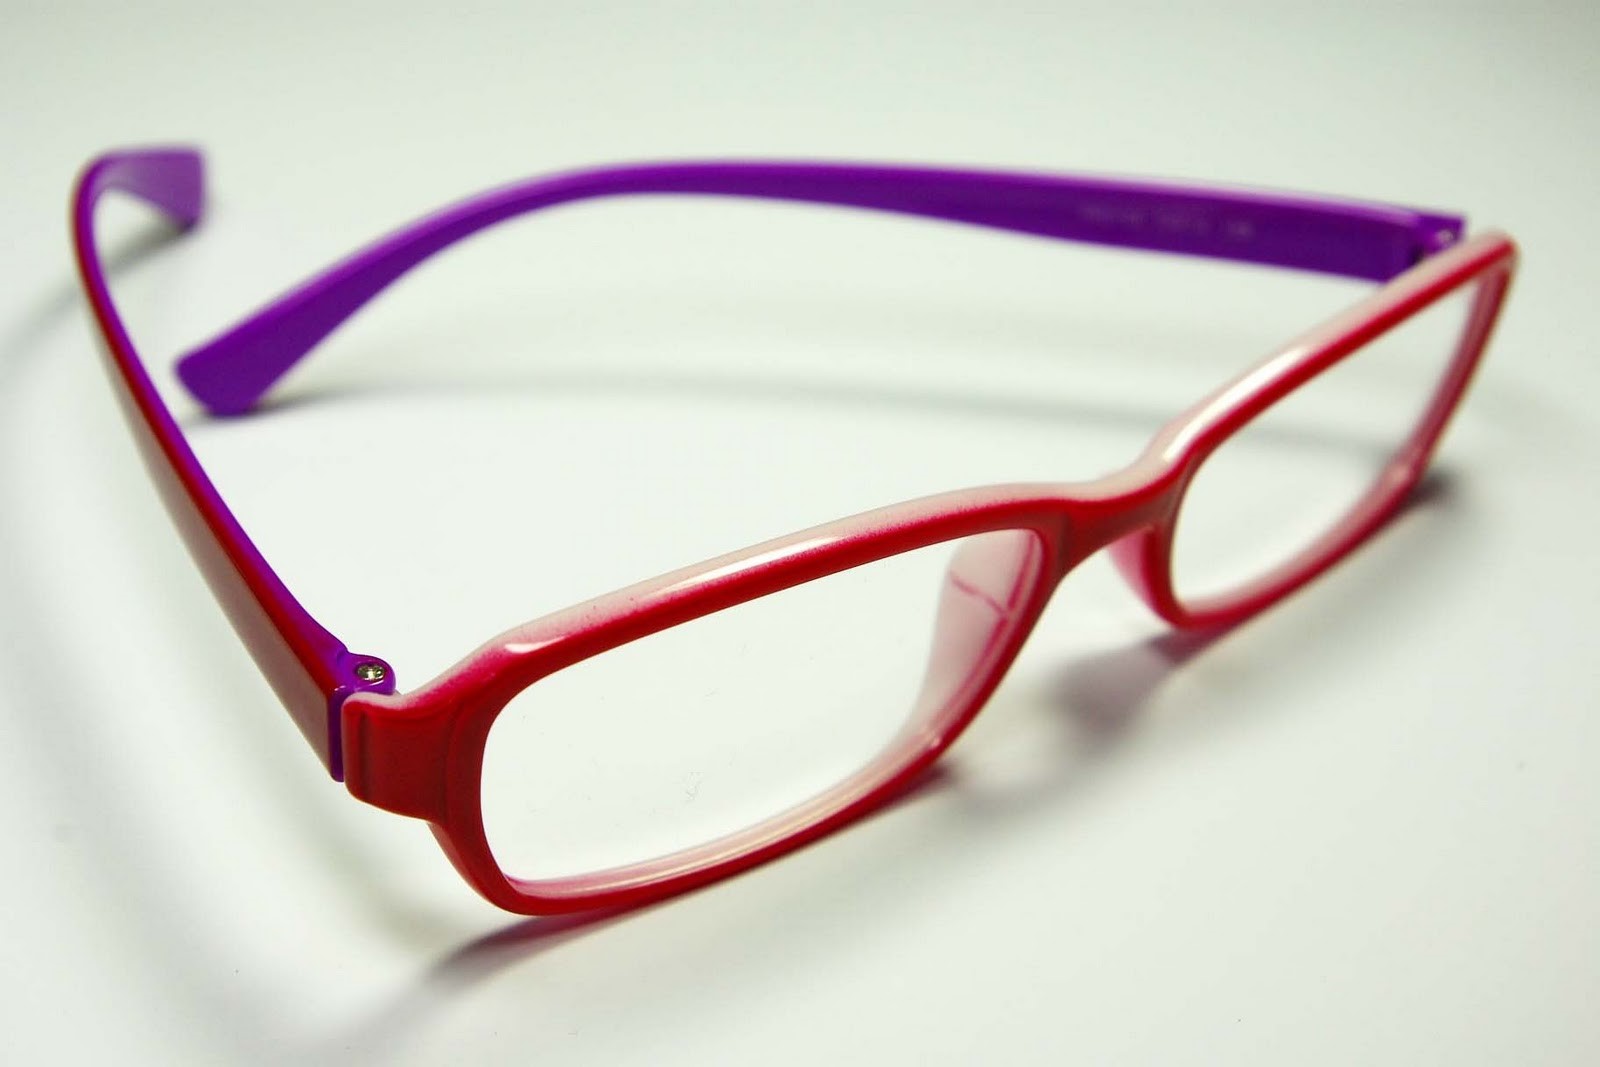 A Brief Overview of Five Popular Brands of Eyeglasses